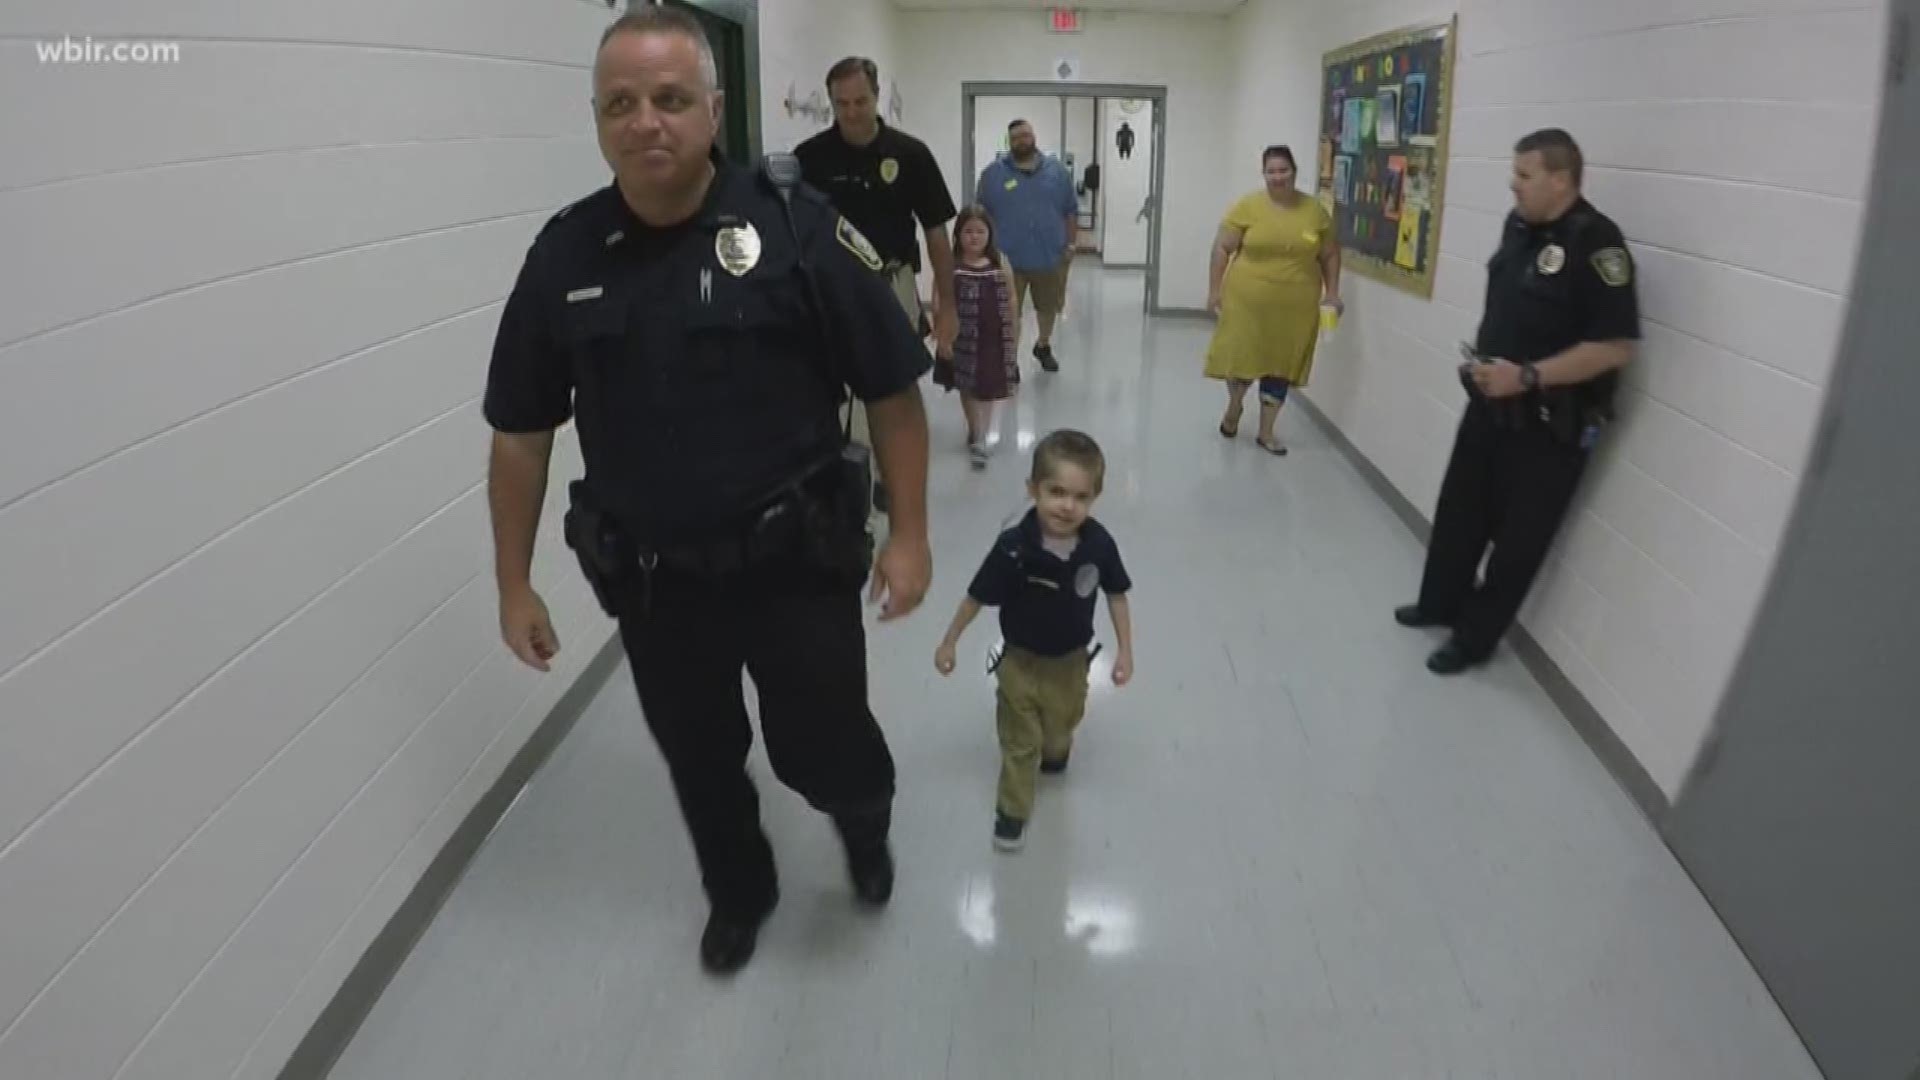 Imagine if your hero threw you a birthday party... For one little boy in Clinton, that dream came true! He was made an honorary police officer for a day.